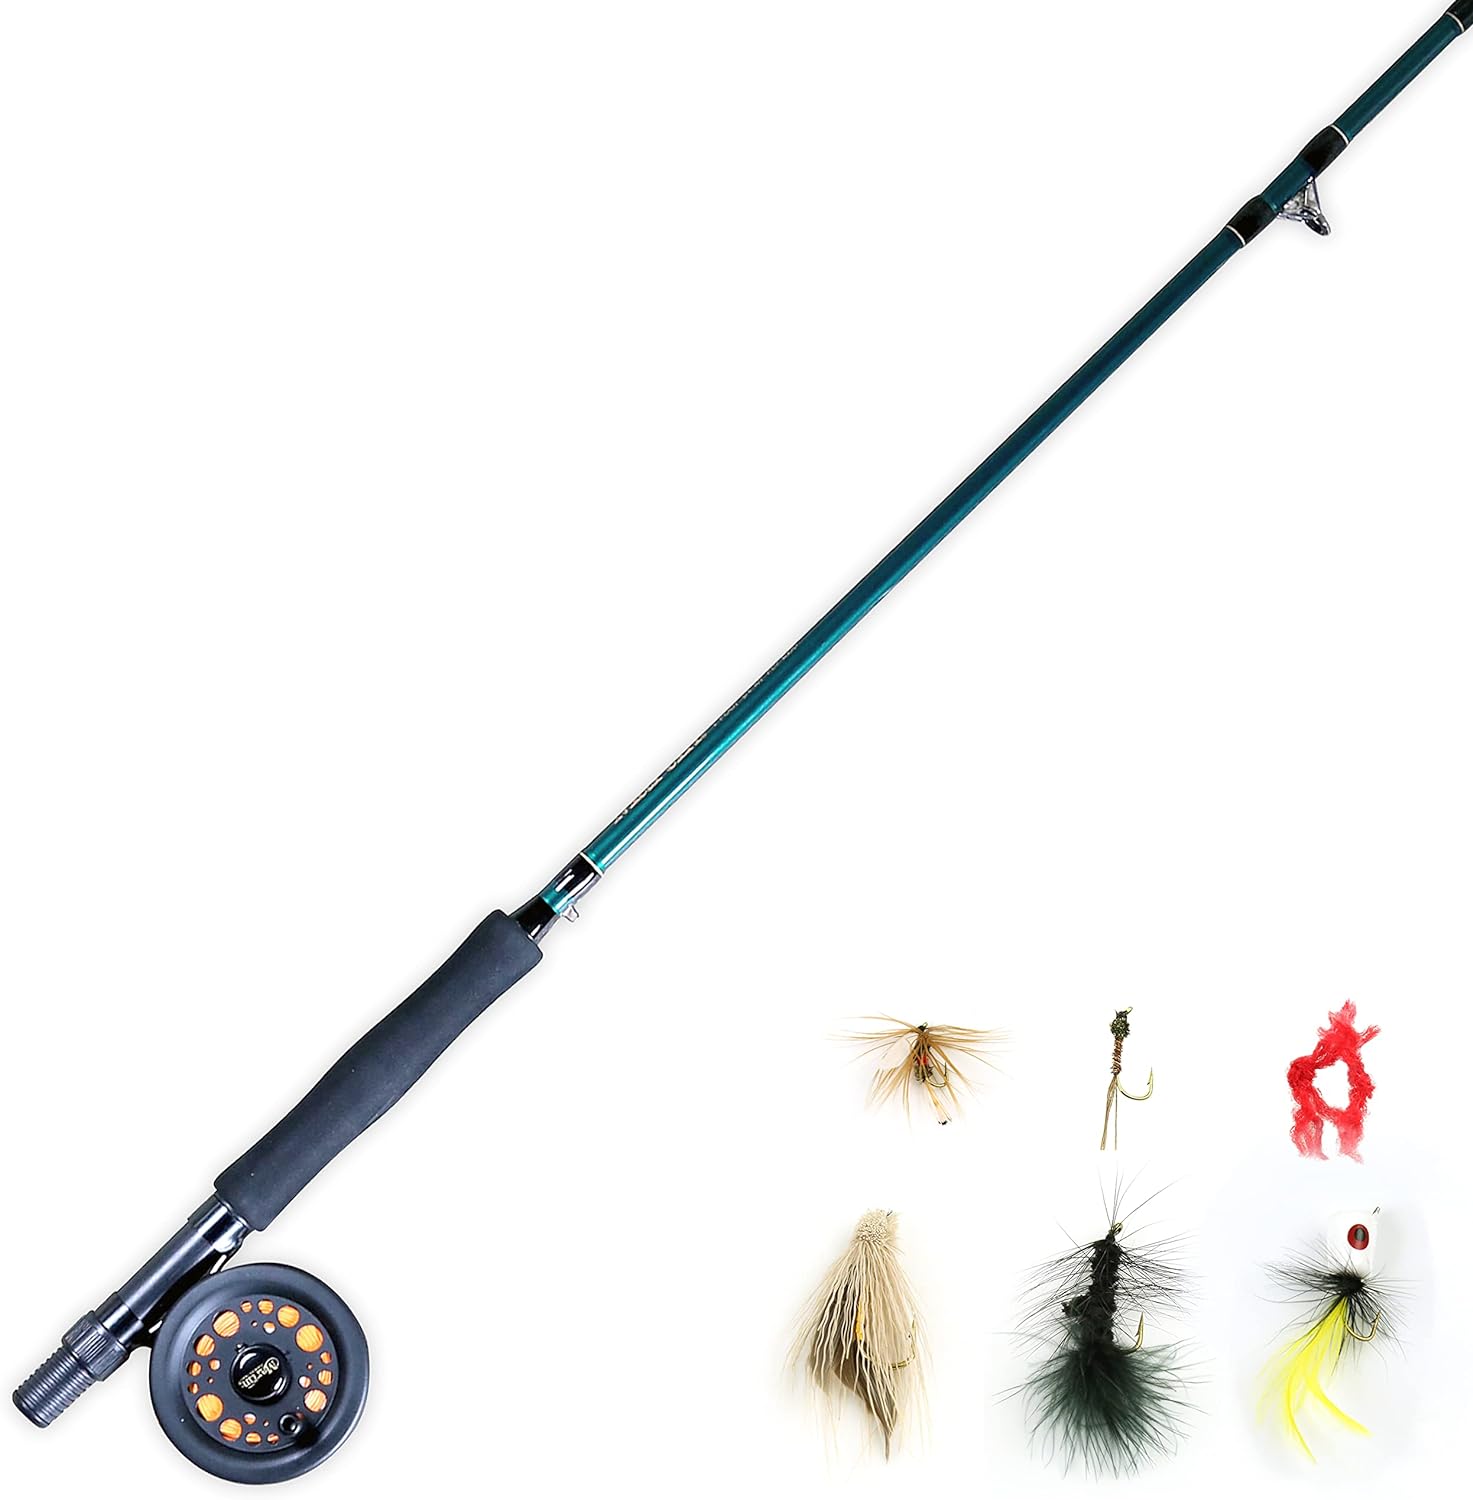 Best Rod for Fly Fishing: Top 5 Picks for Ultimate Angling Experience